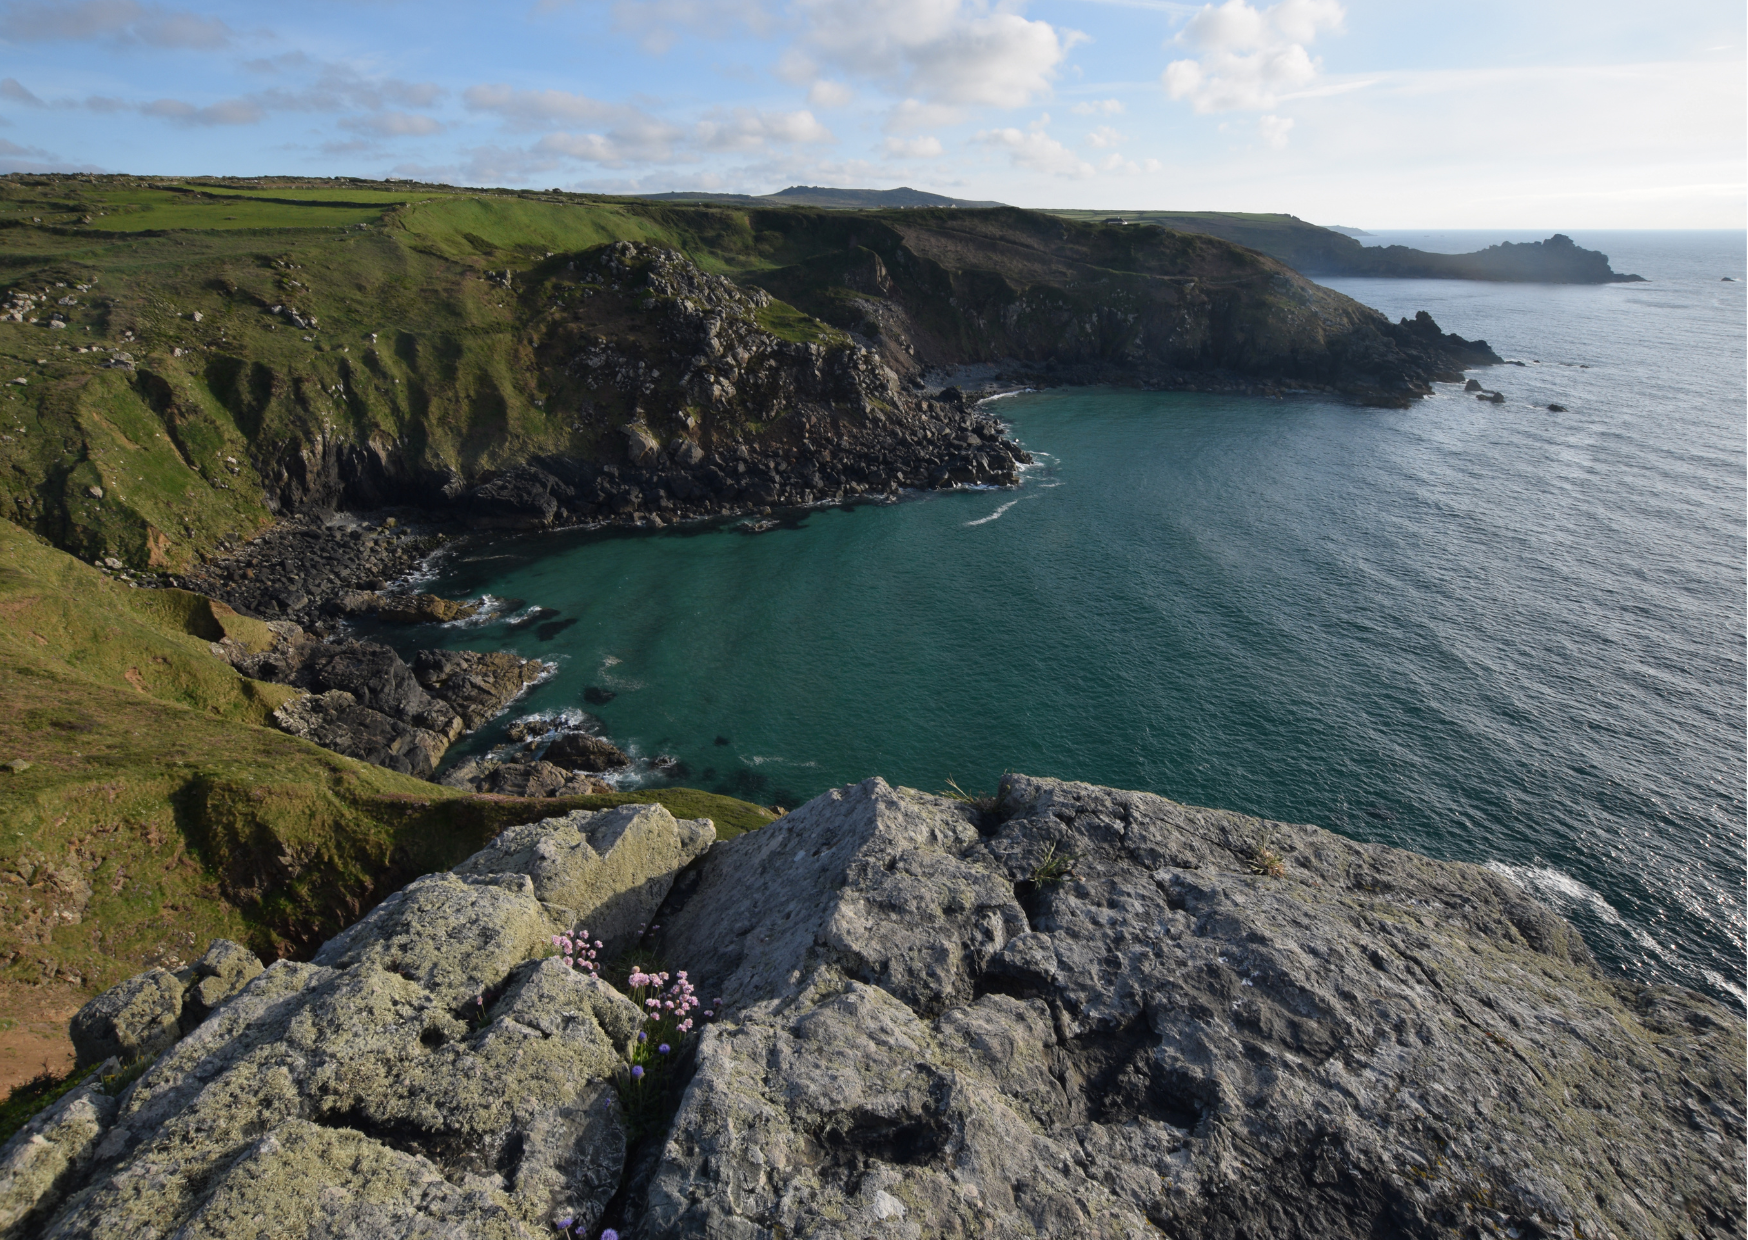 Around Our Shores: The Mermaid of Zennor, Cornwall